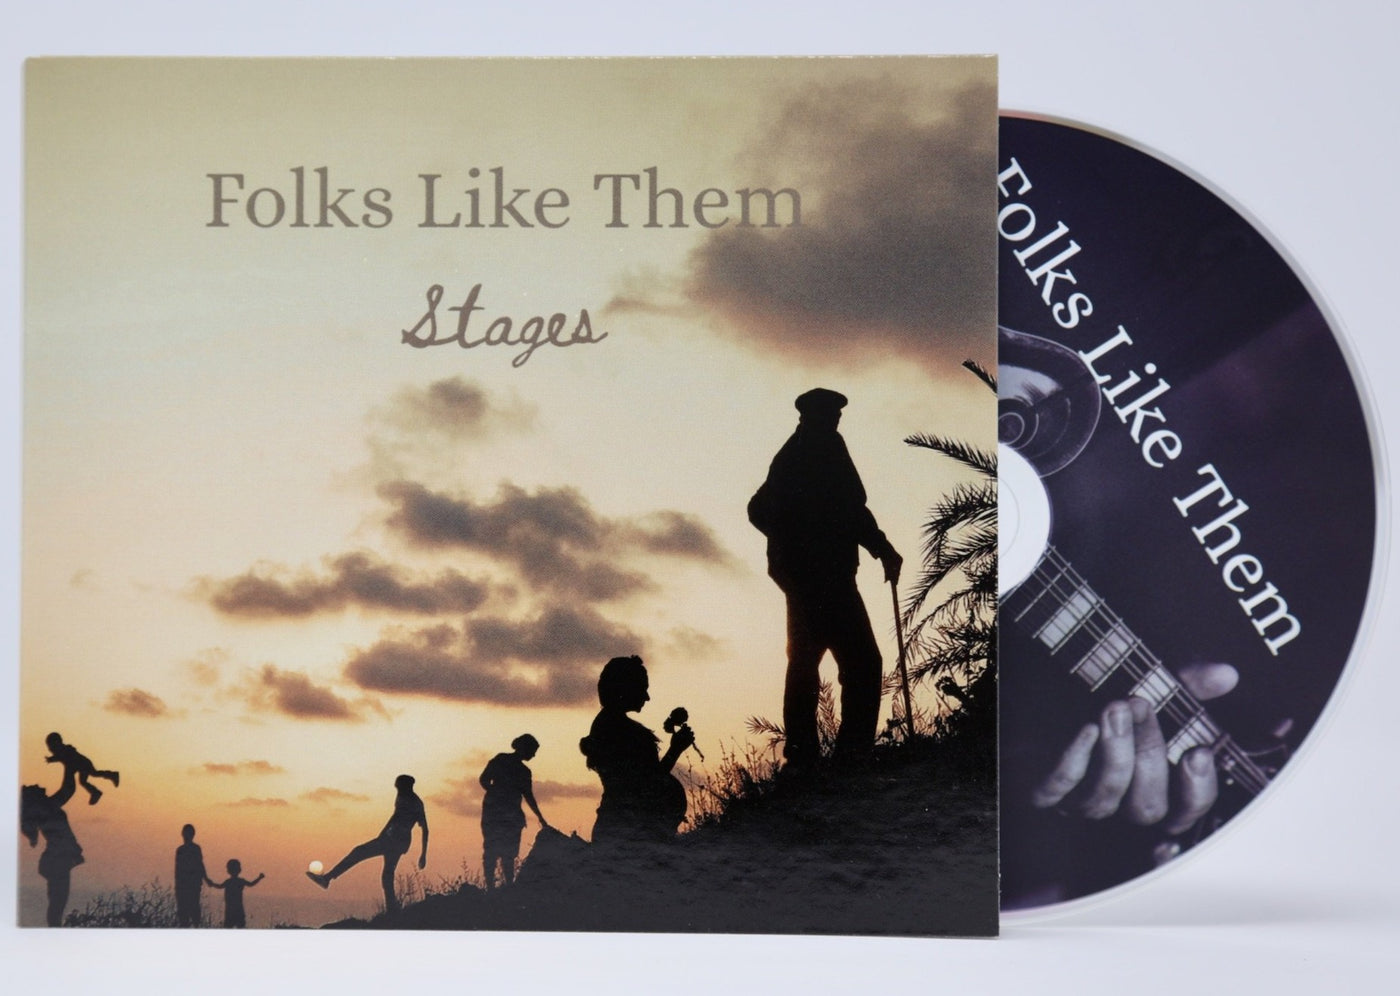 Stages - Signed CD, Digital, Streaming